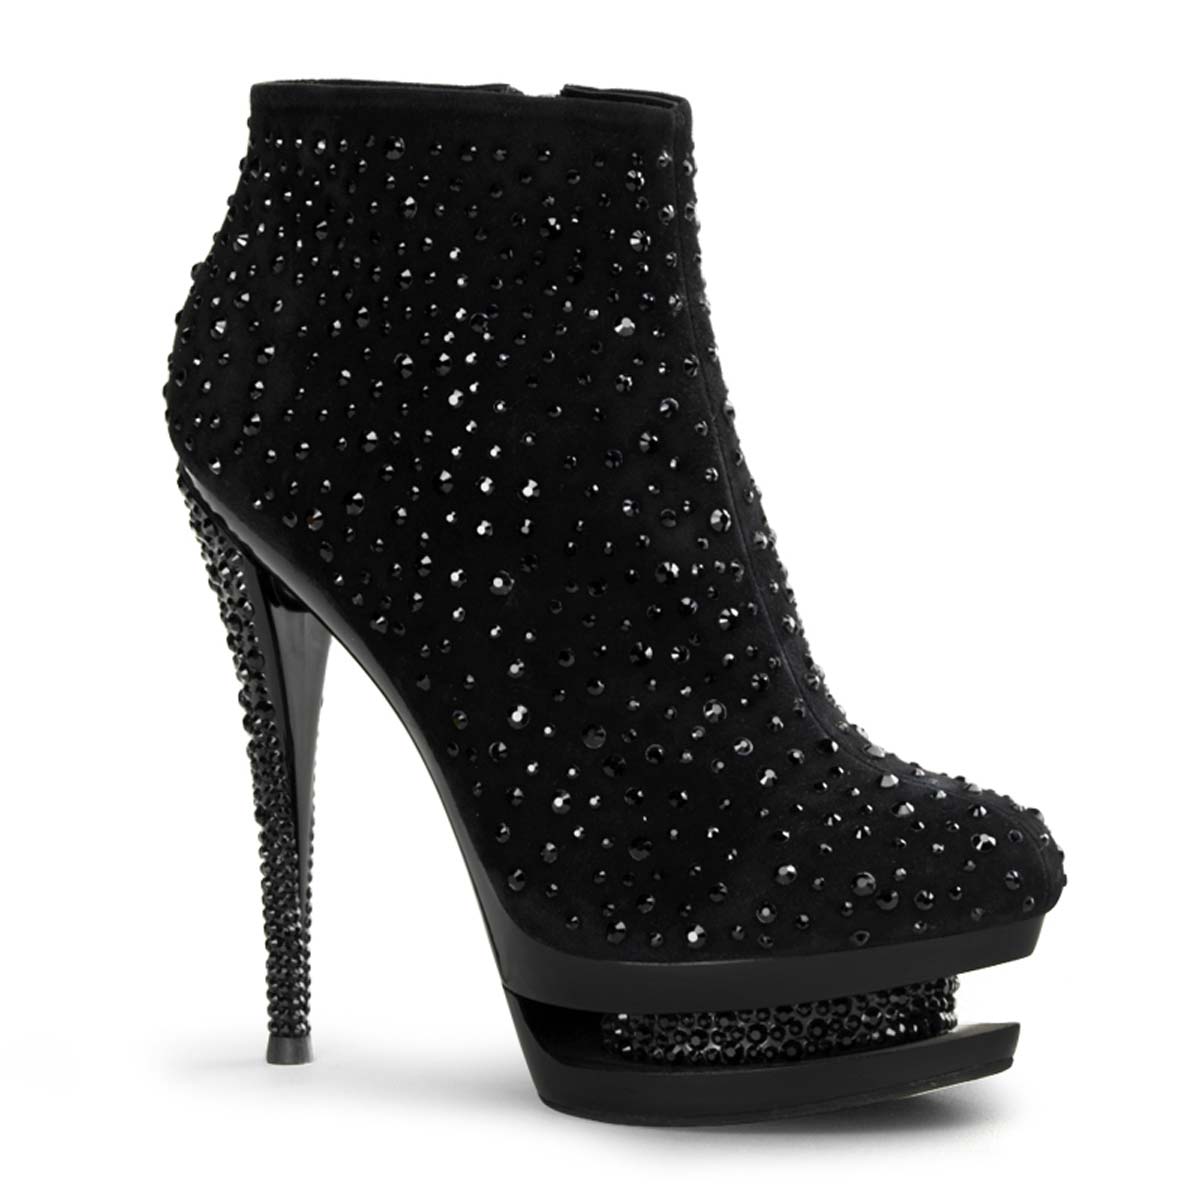 Pleaser Fascinate-1011 - Black Suede/Black in Sexy Boots - $51.29